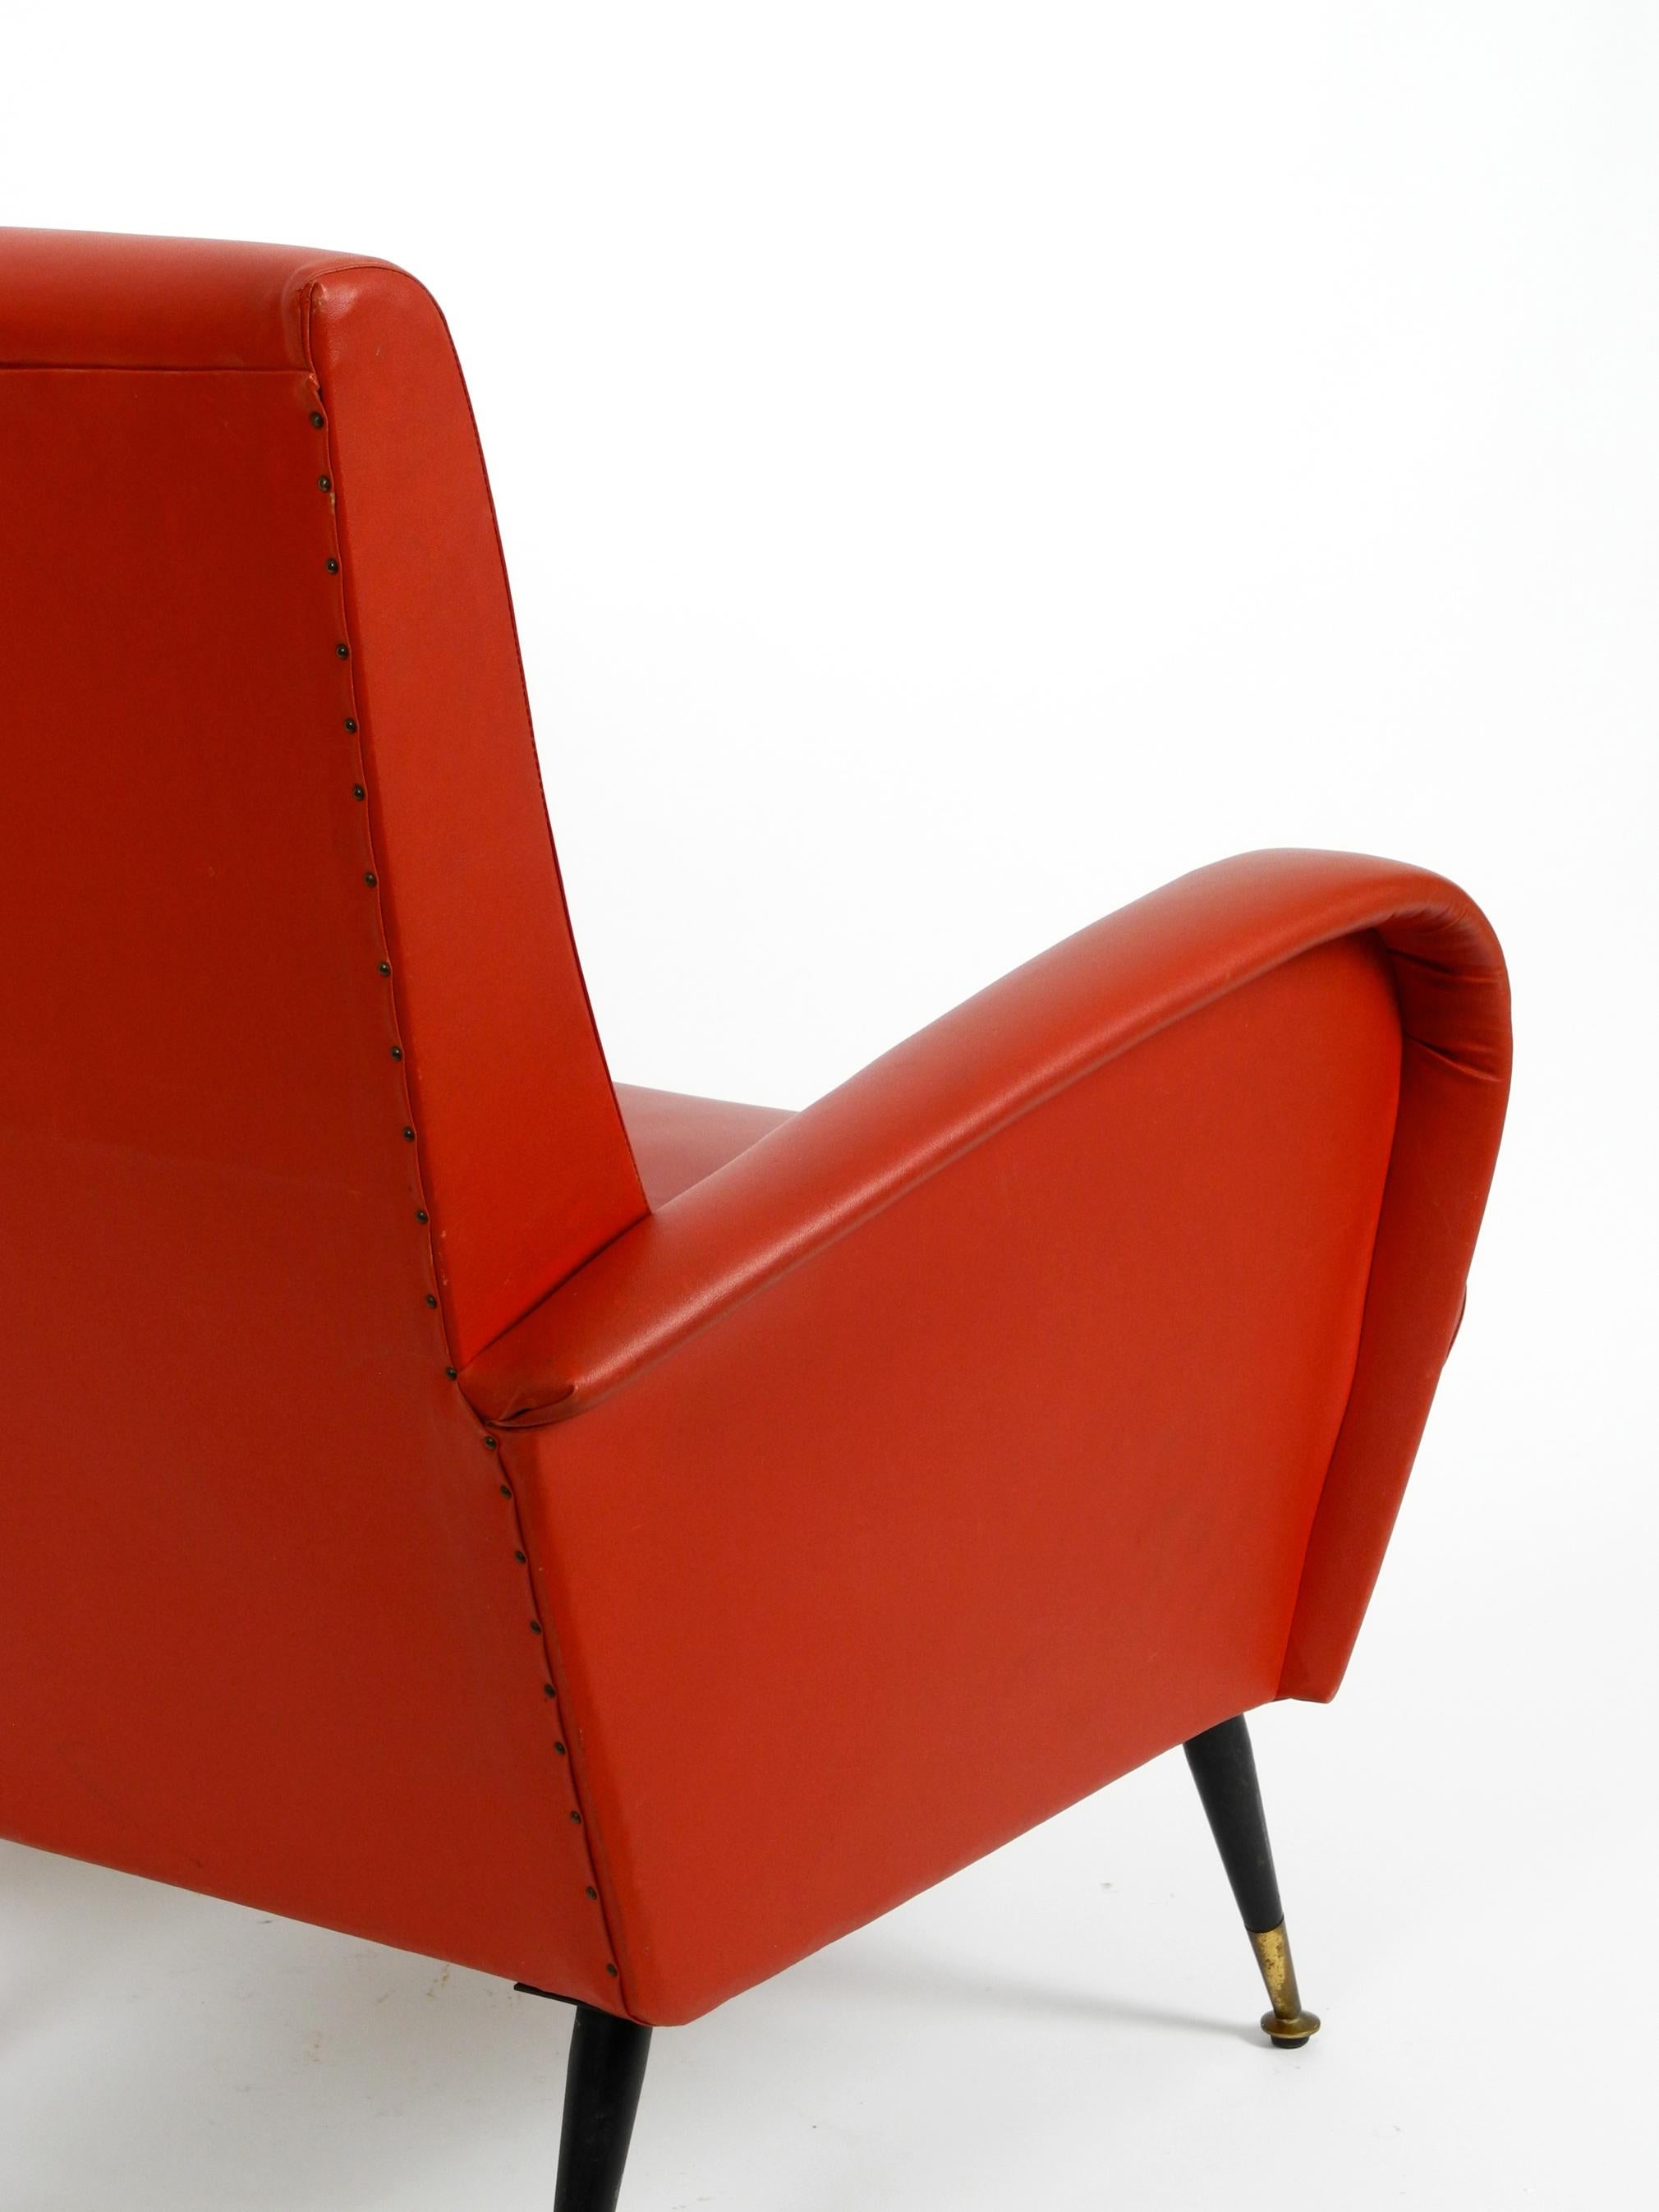 Metal Italian Midcentury Lounge Chair with Red Original Faux Leather Cover